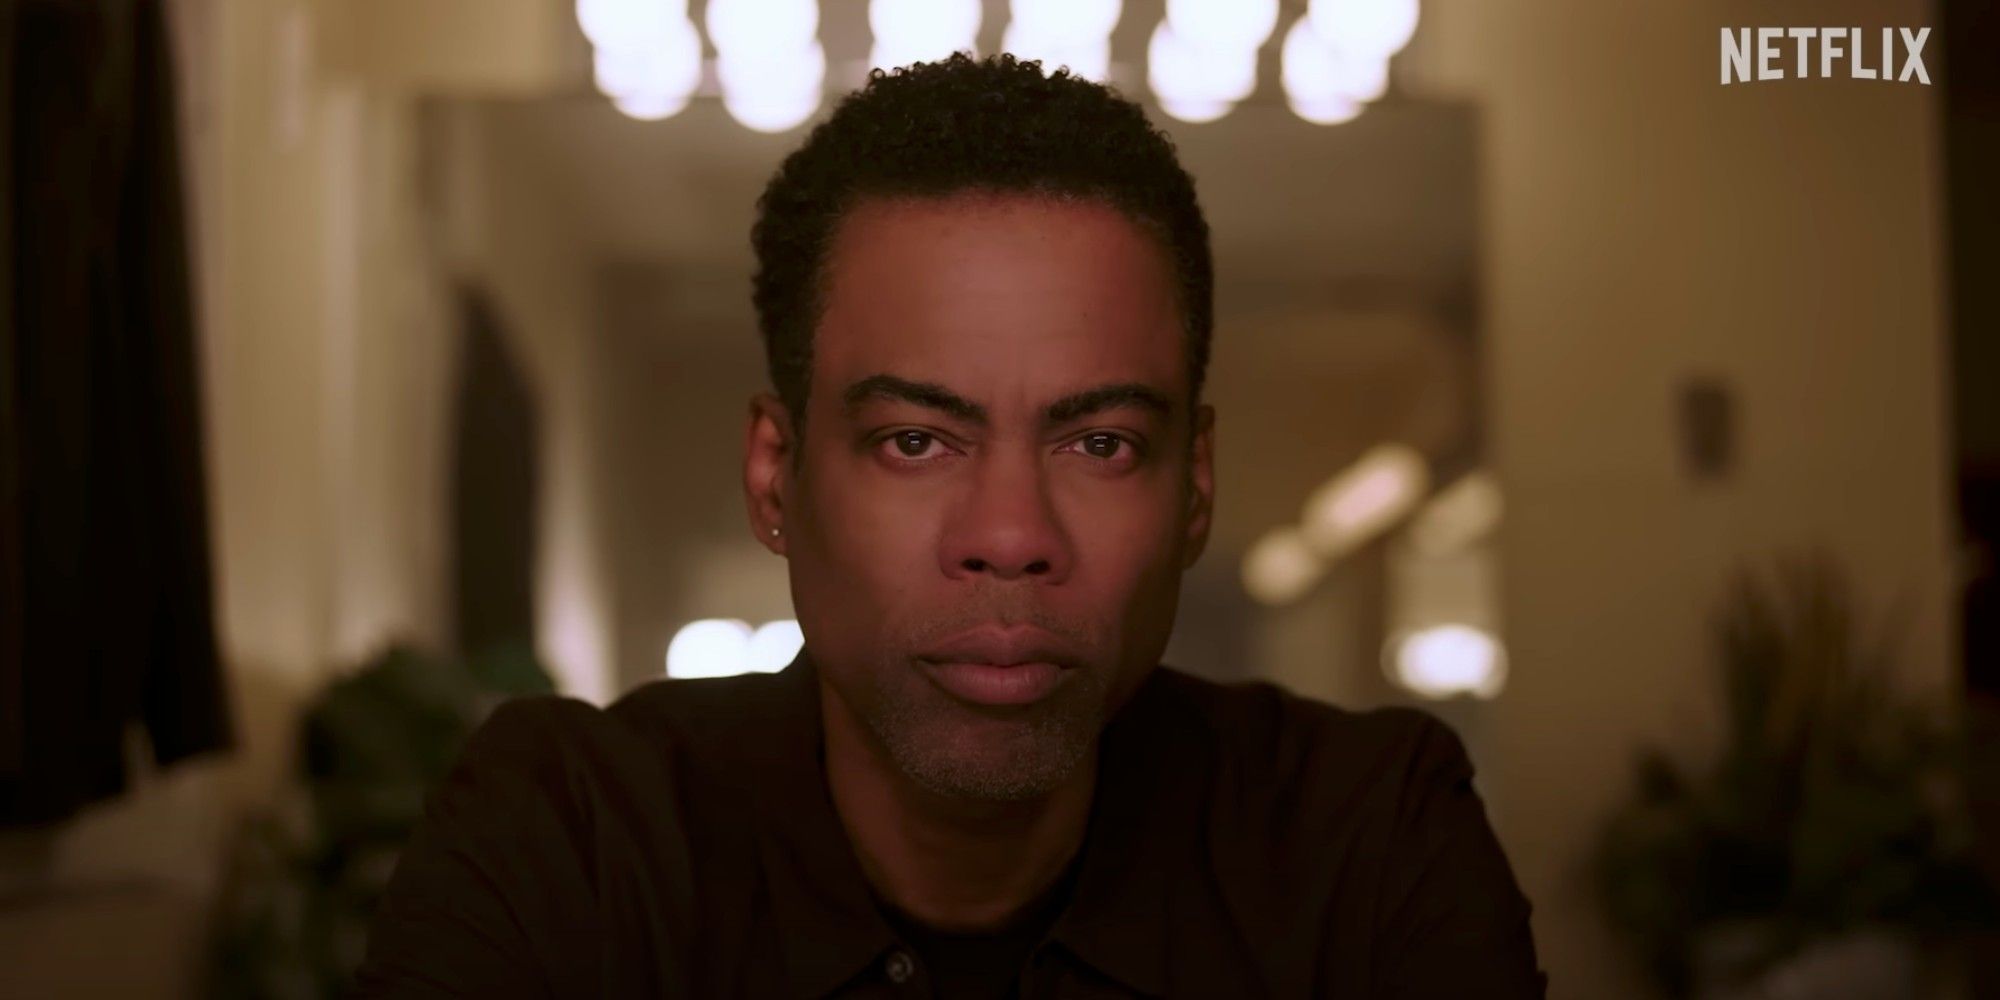 Chris Rock looking into the camera in Chris Rock - Selective Outrage